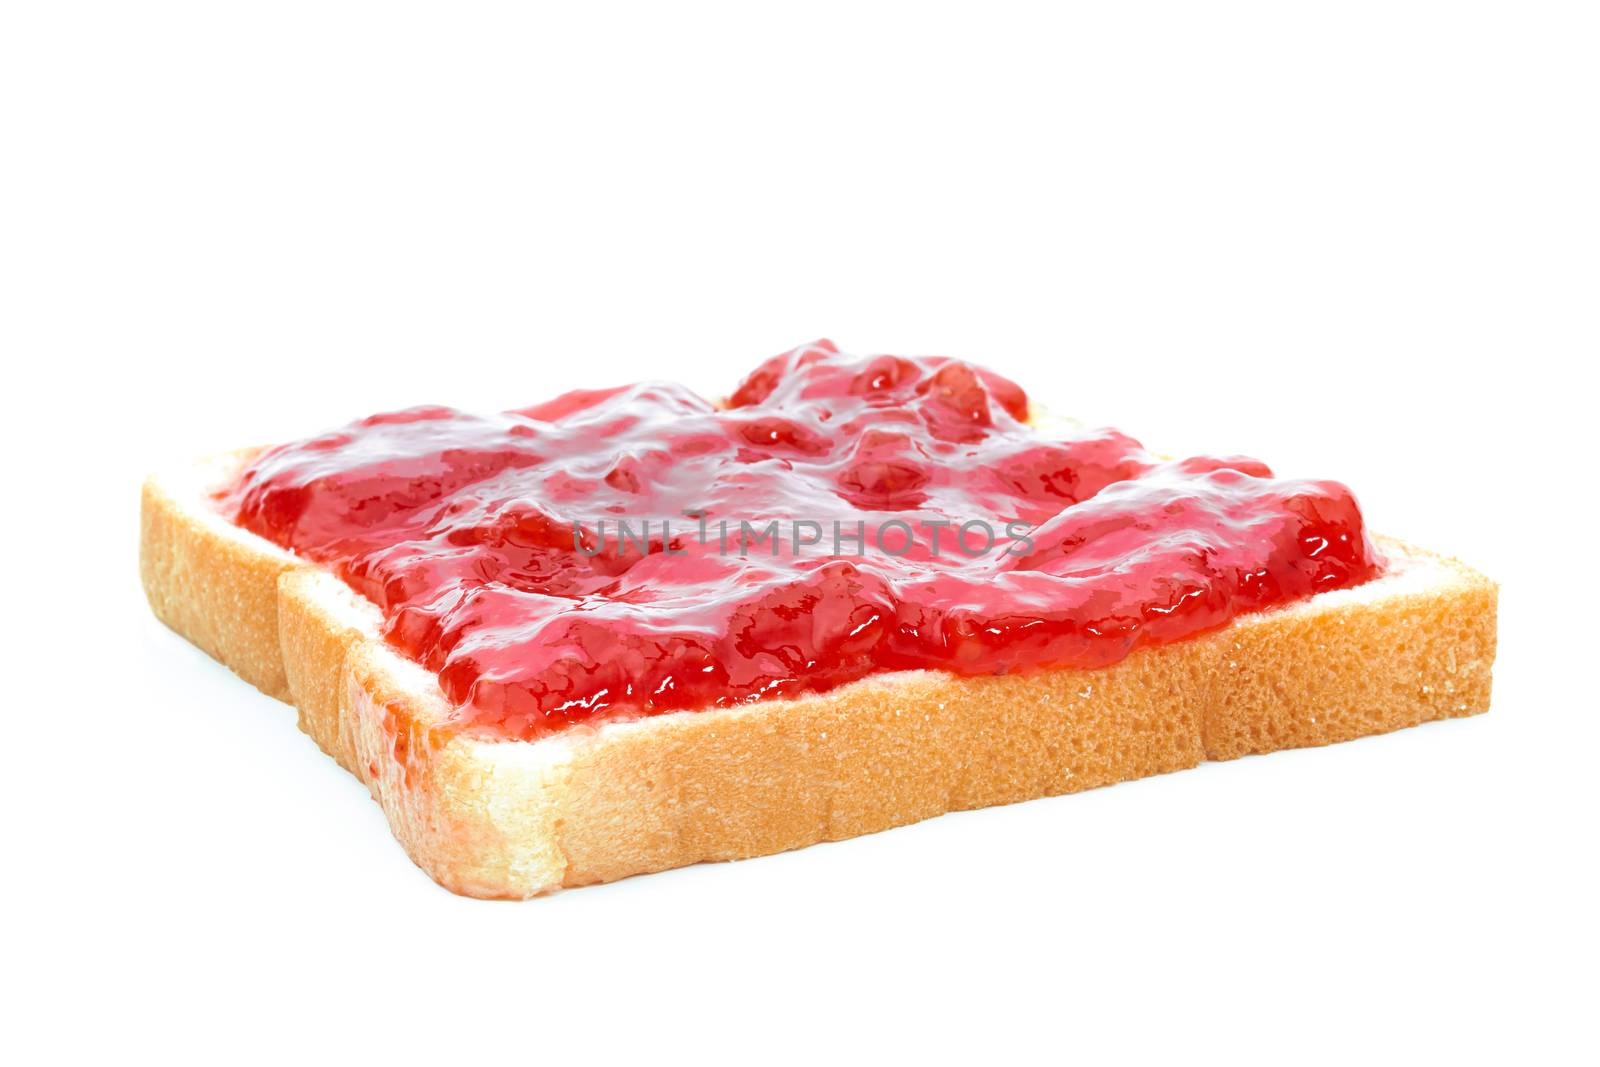 Strawberry jam bread on a white background by sompongtom